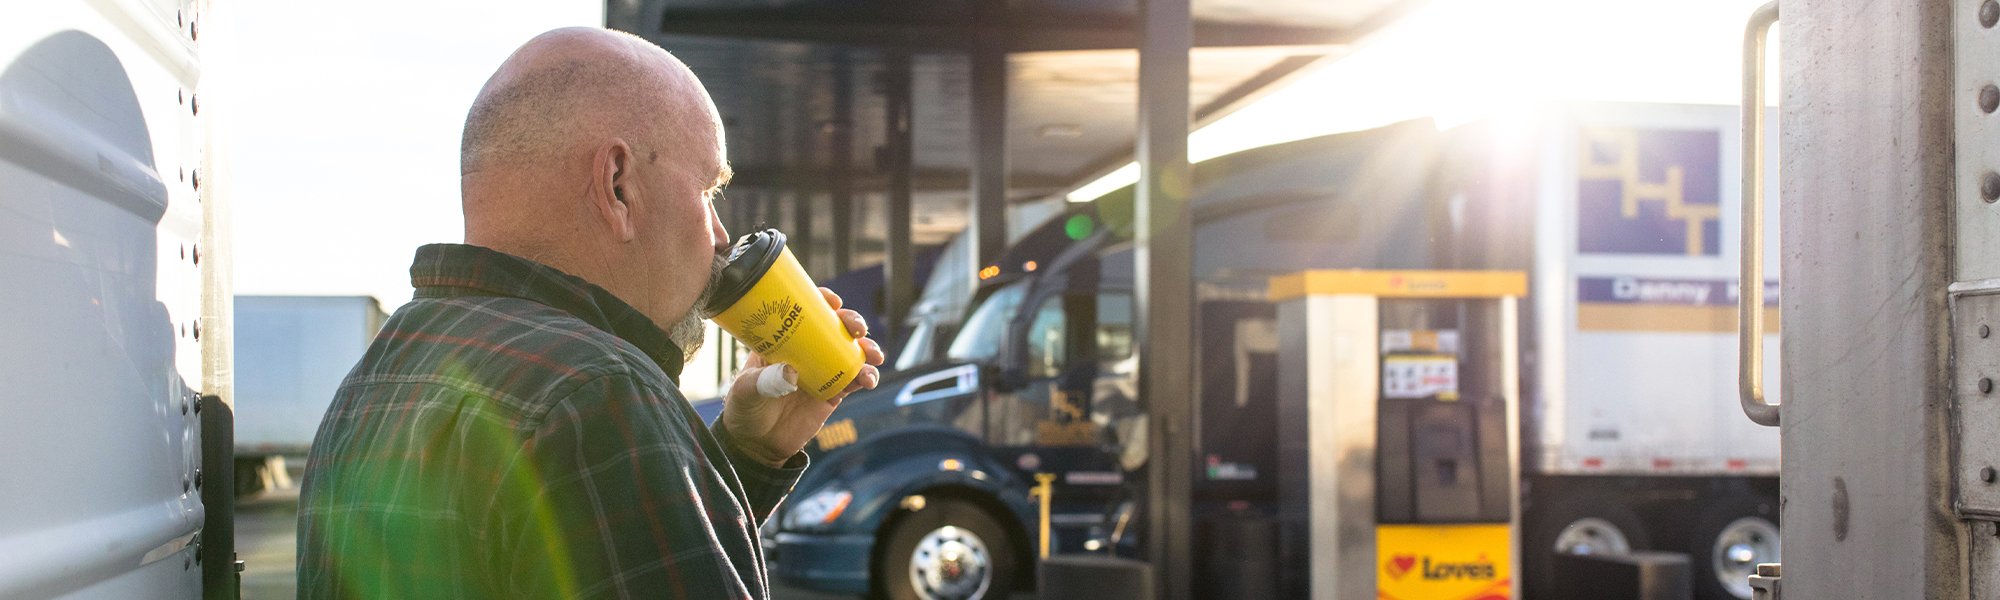 Customer drinking Java Amore cup at diesel fueling bays